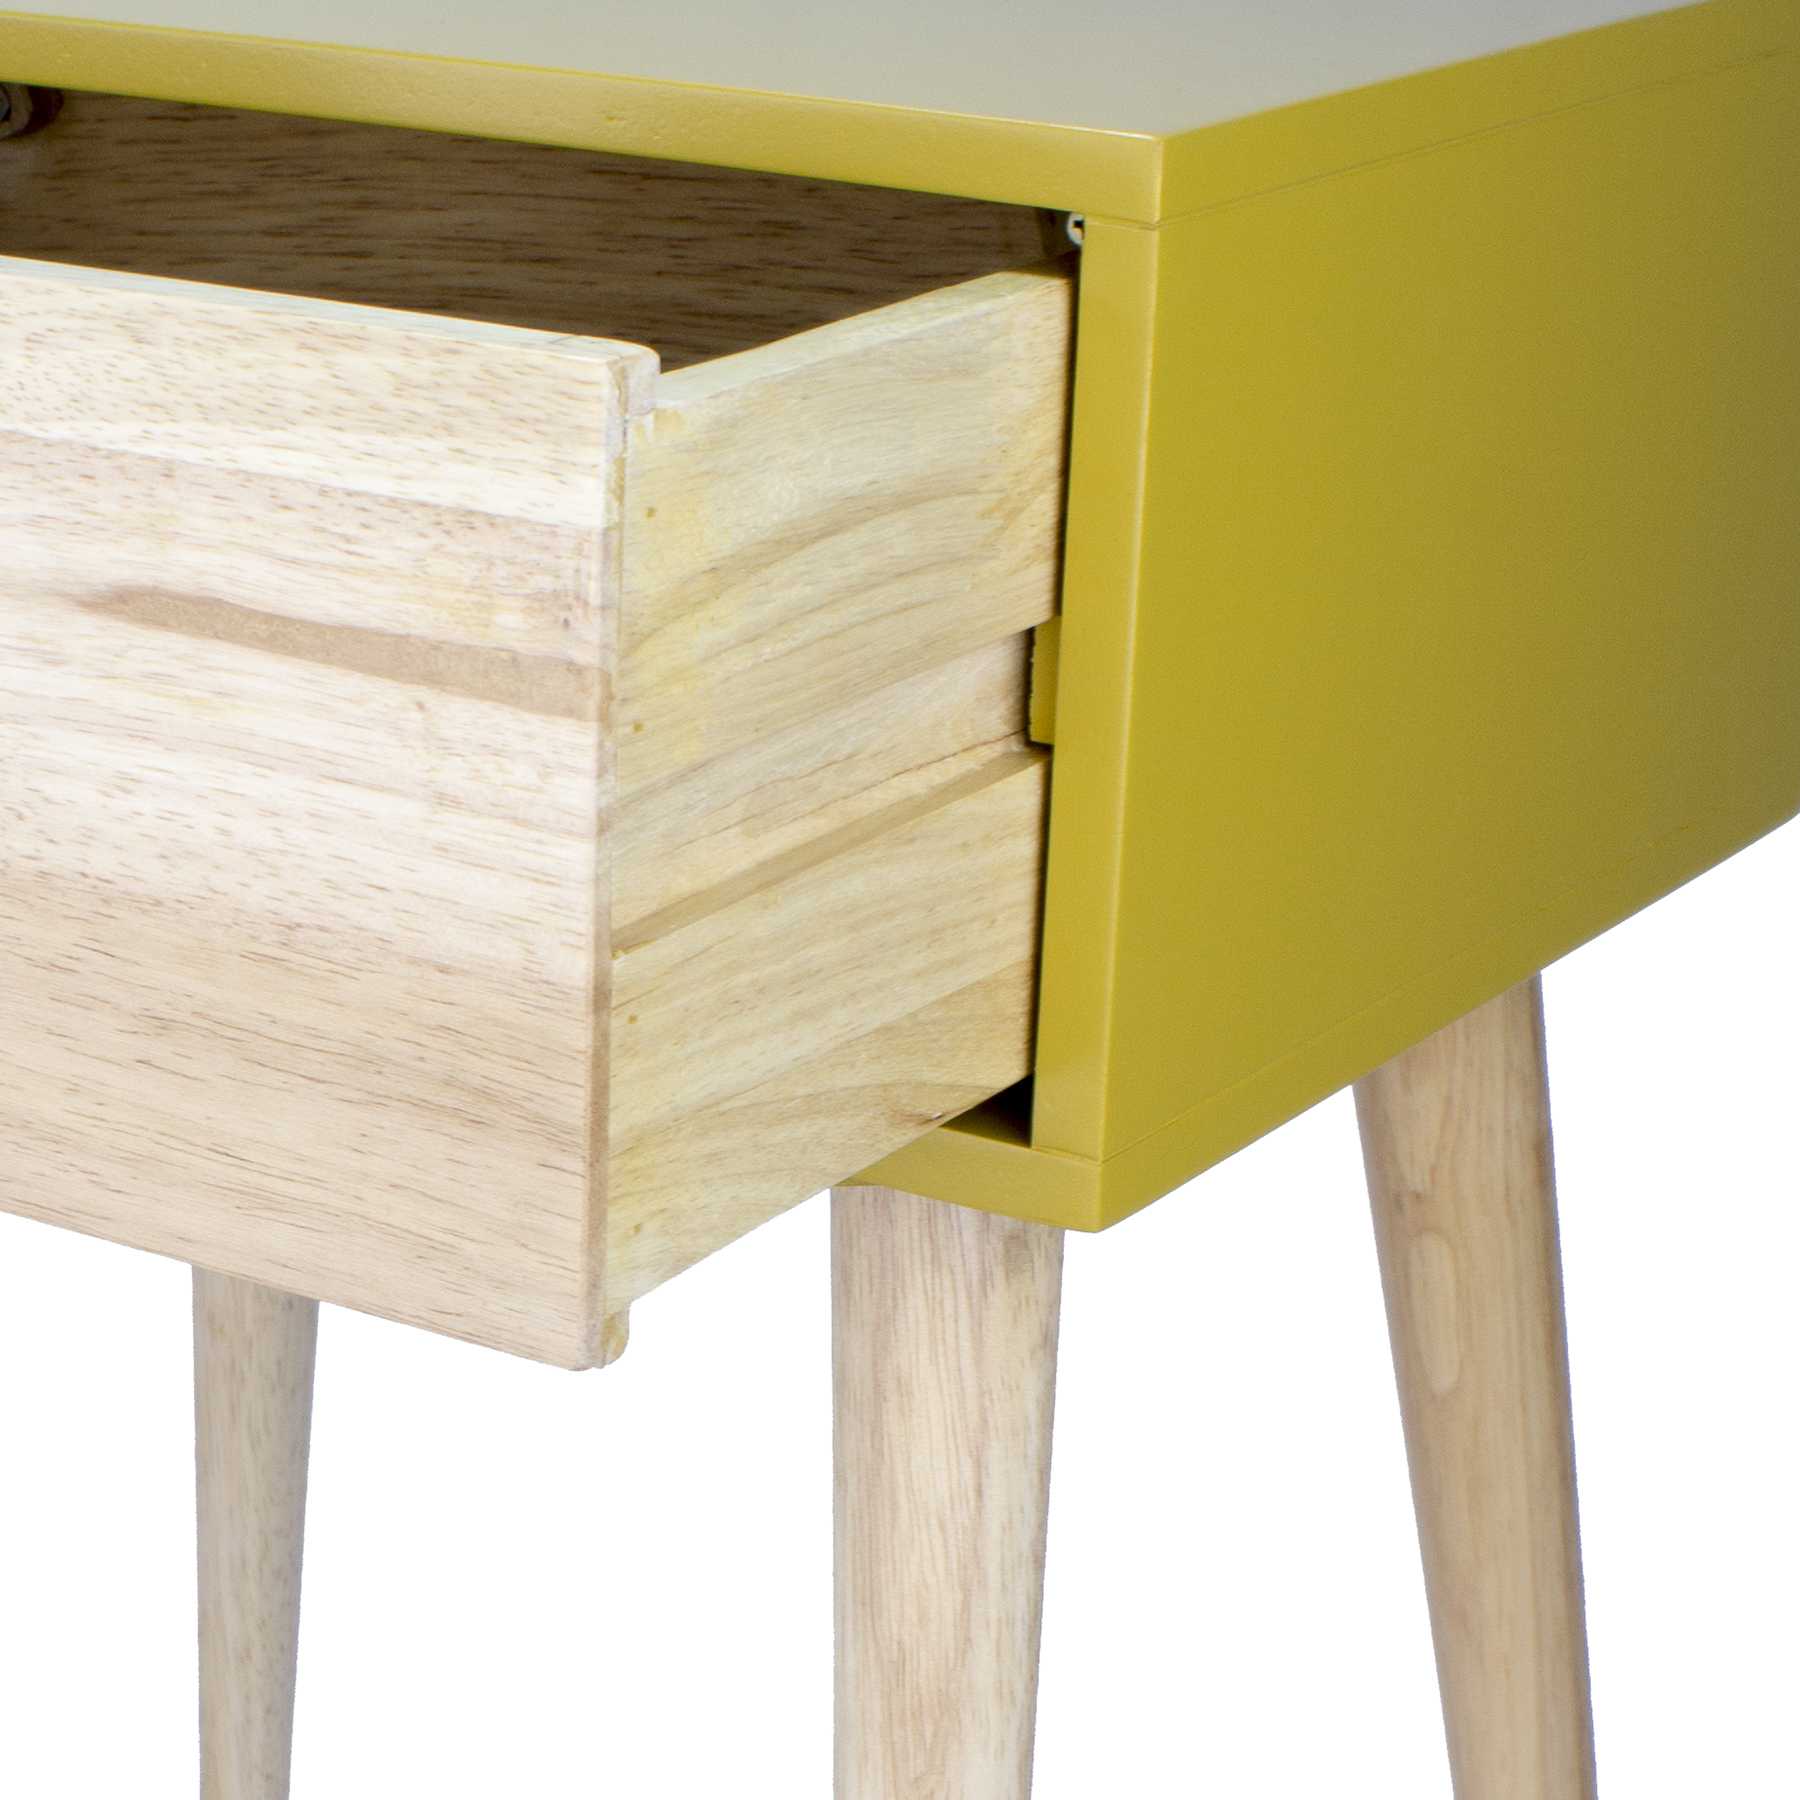 16" X 12" X 24" Yellow MDF Wood End Table with Drawer